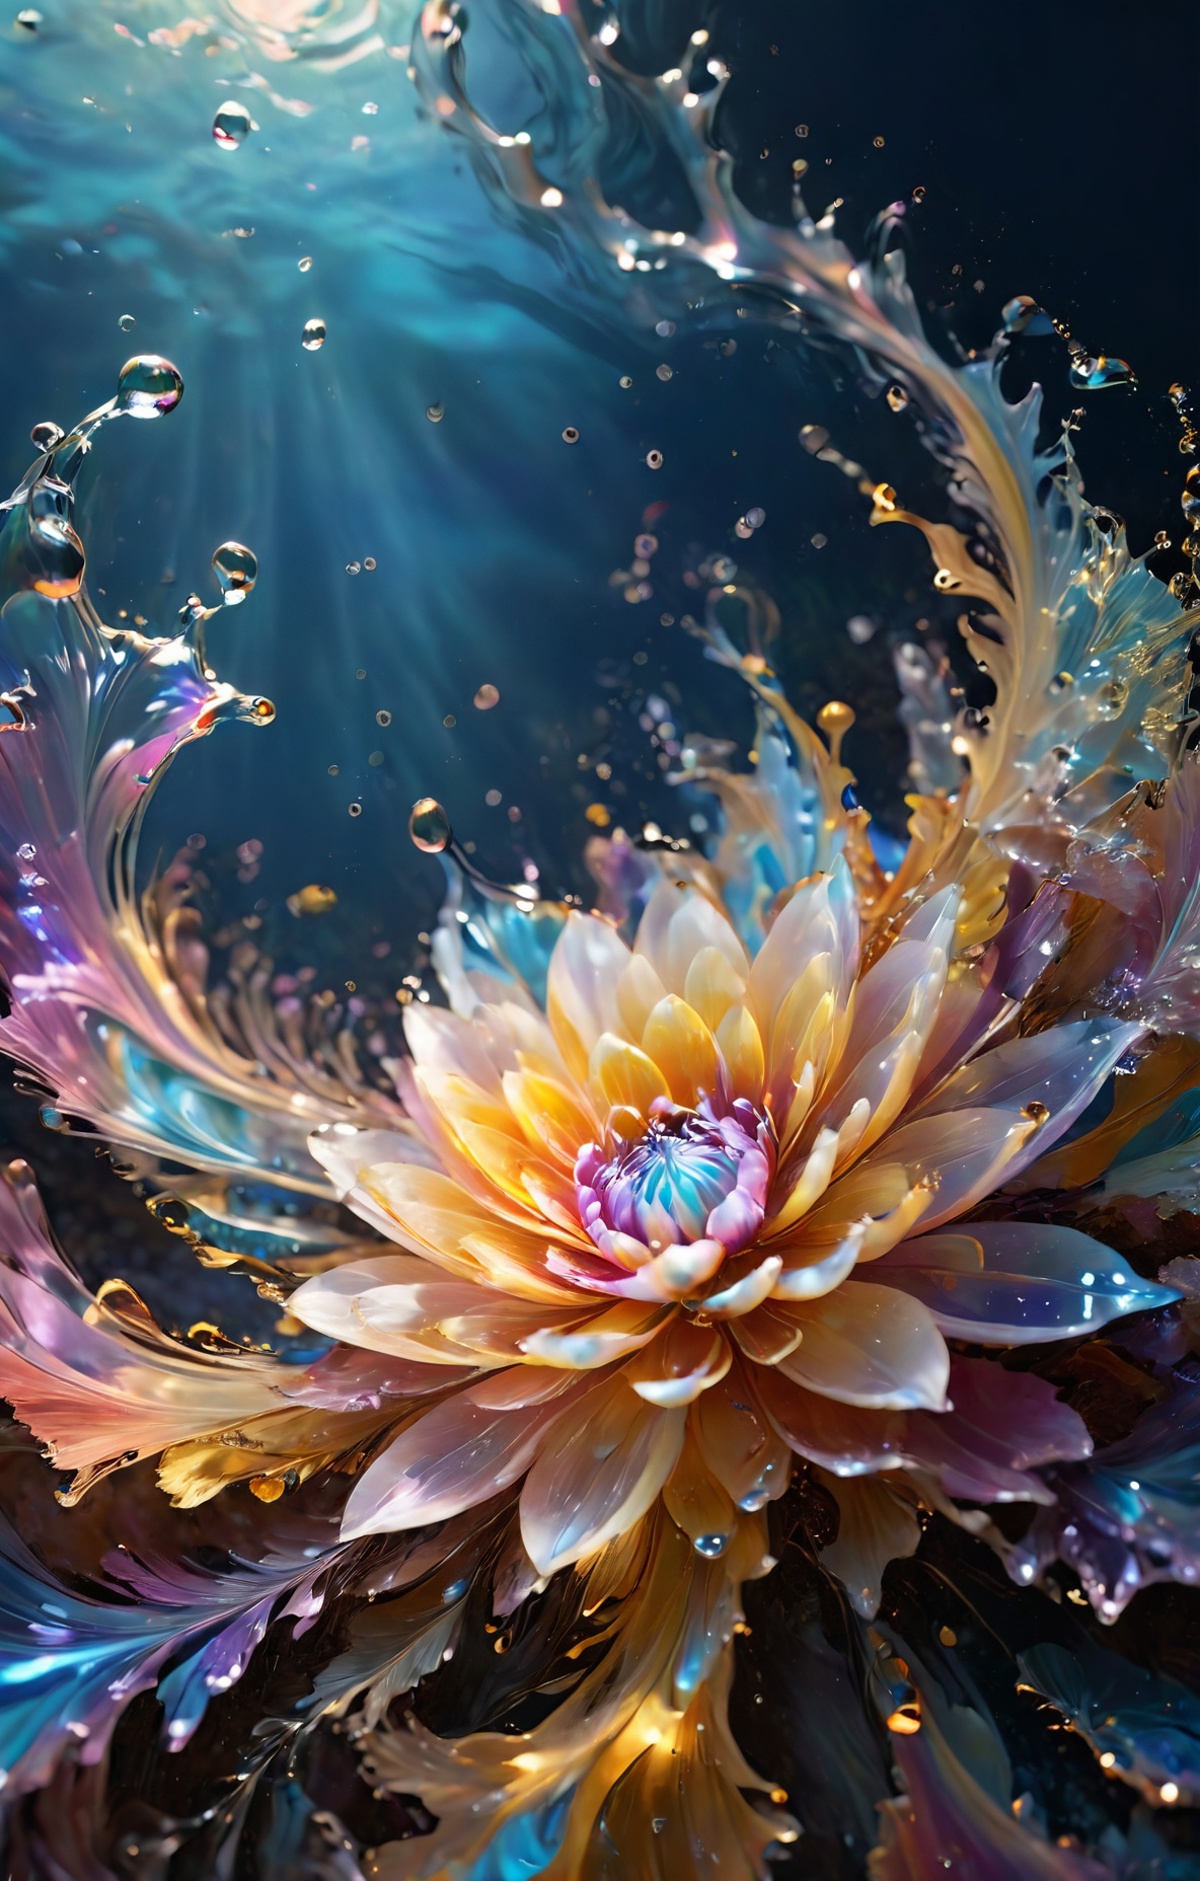 Artistic Painting of a Water Lily with Droplets of Water and Yellow and Purple Colors